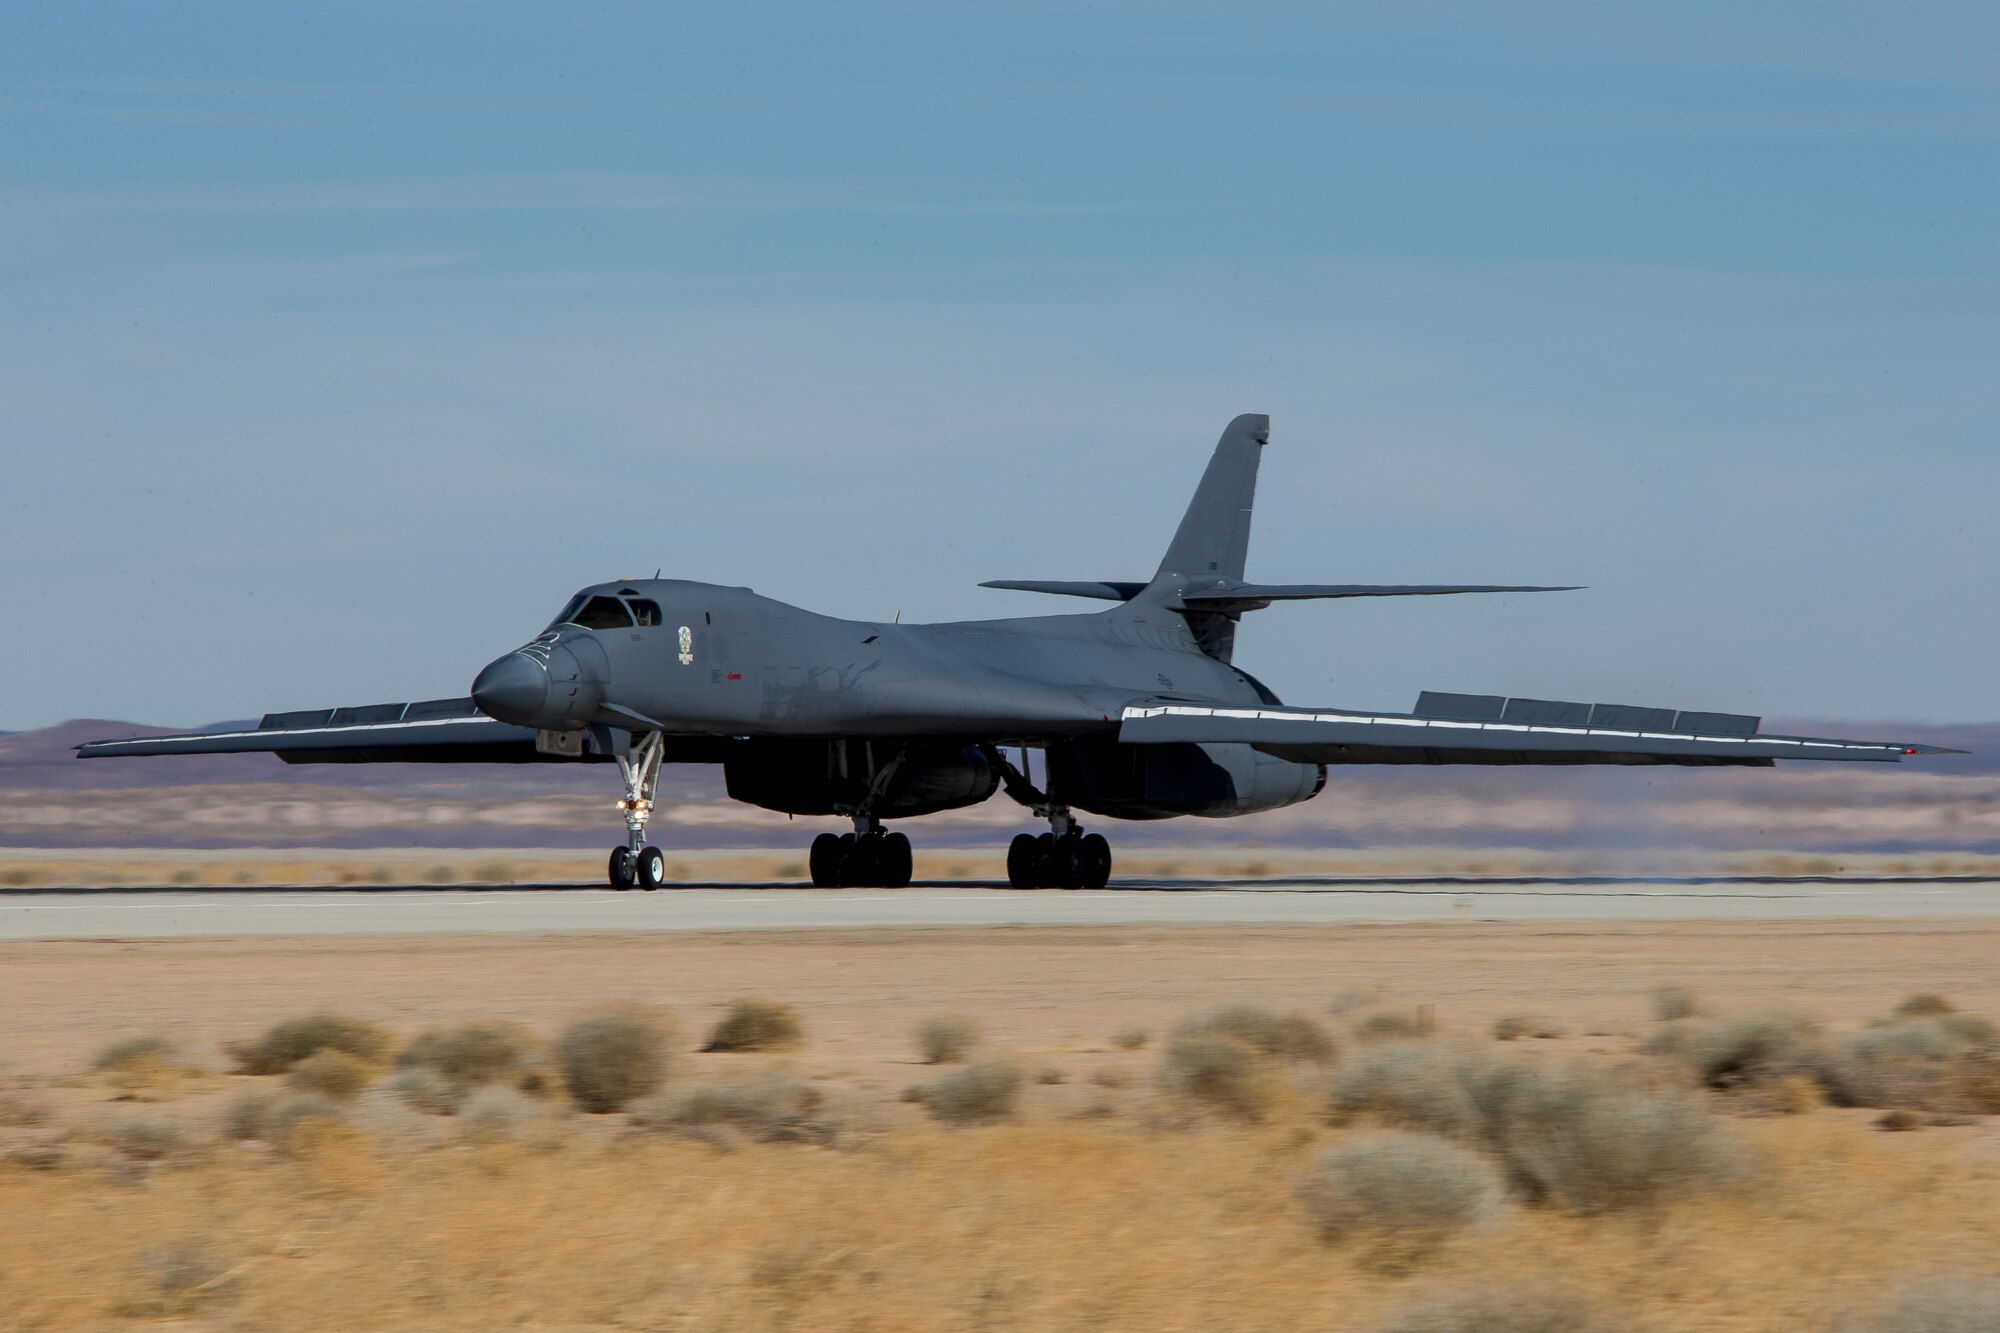 A recently retired B-1B Lancer, tail number 86-0099, lands at Edwards Air Force Base, California, Feb. 23. The aircraft will become the Edwards Aircraft Ground Integration Lab, or EAGIL, a non-flyable aircraft that will be used as an integration lab for future upgrades. (Air Force photo by May Straight)